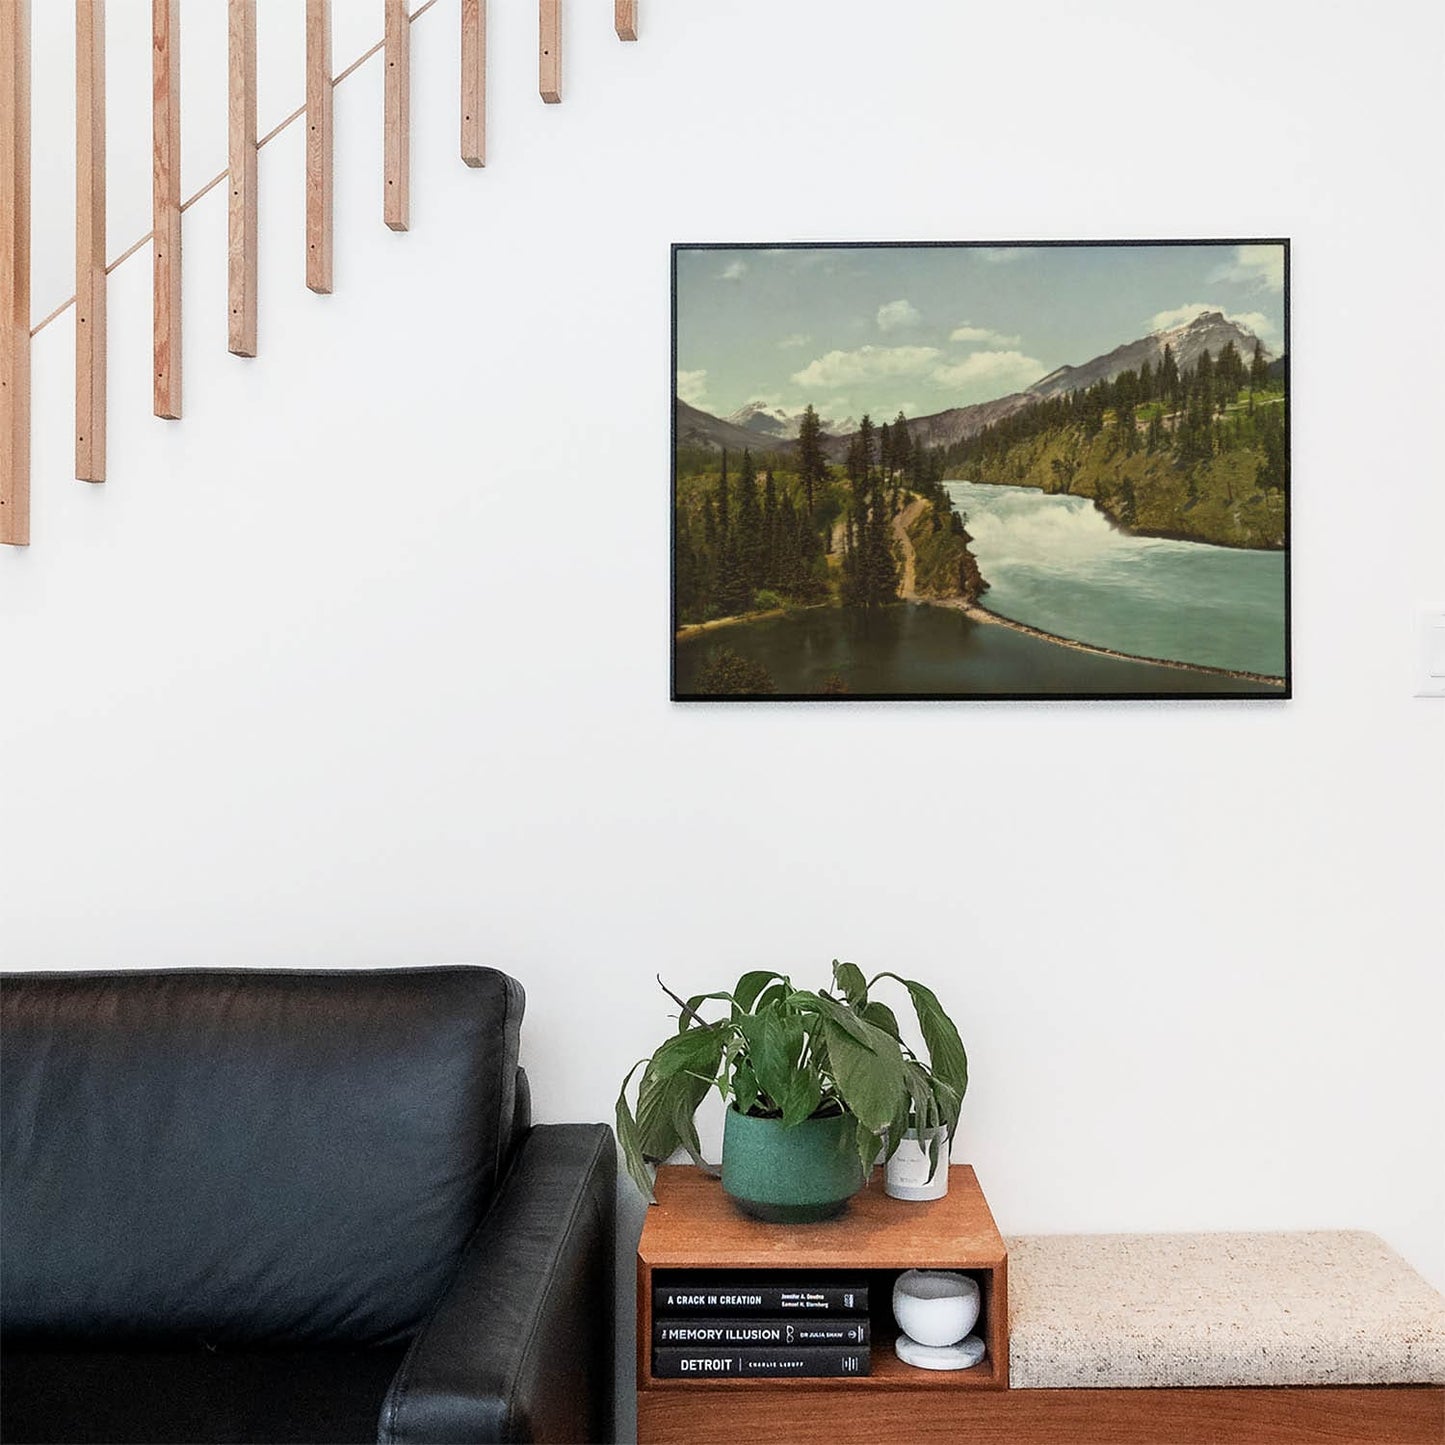 Living space with a black leather couch and table with a plant and books below a staircase featuring a framed picture of Mountains and Rivers